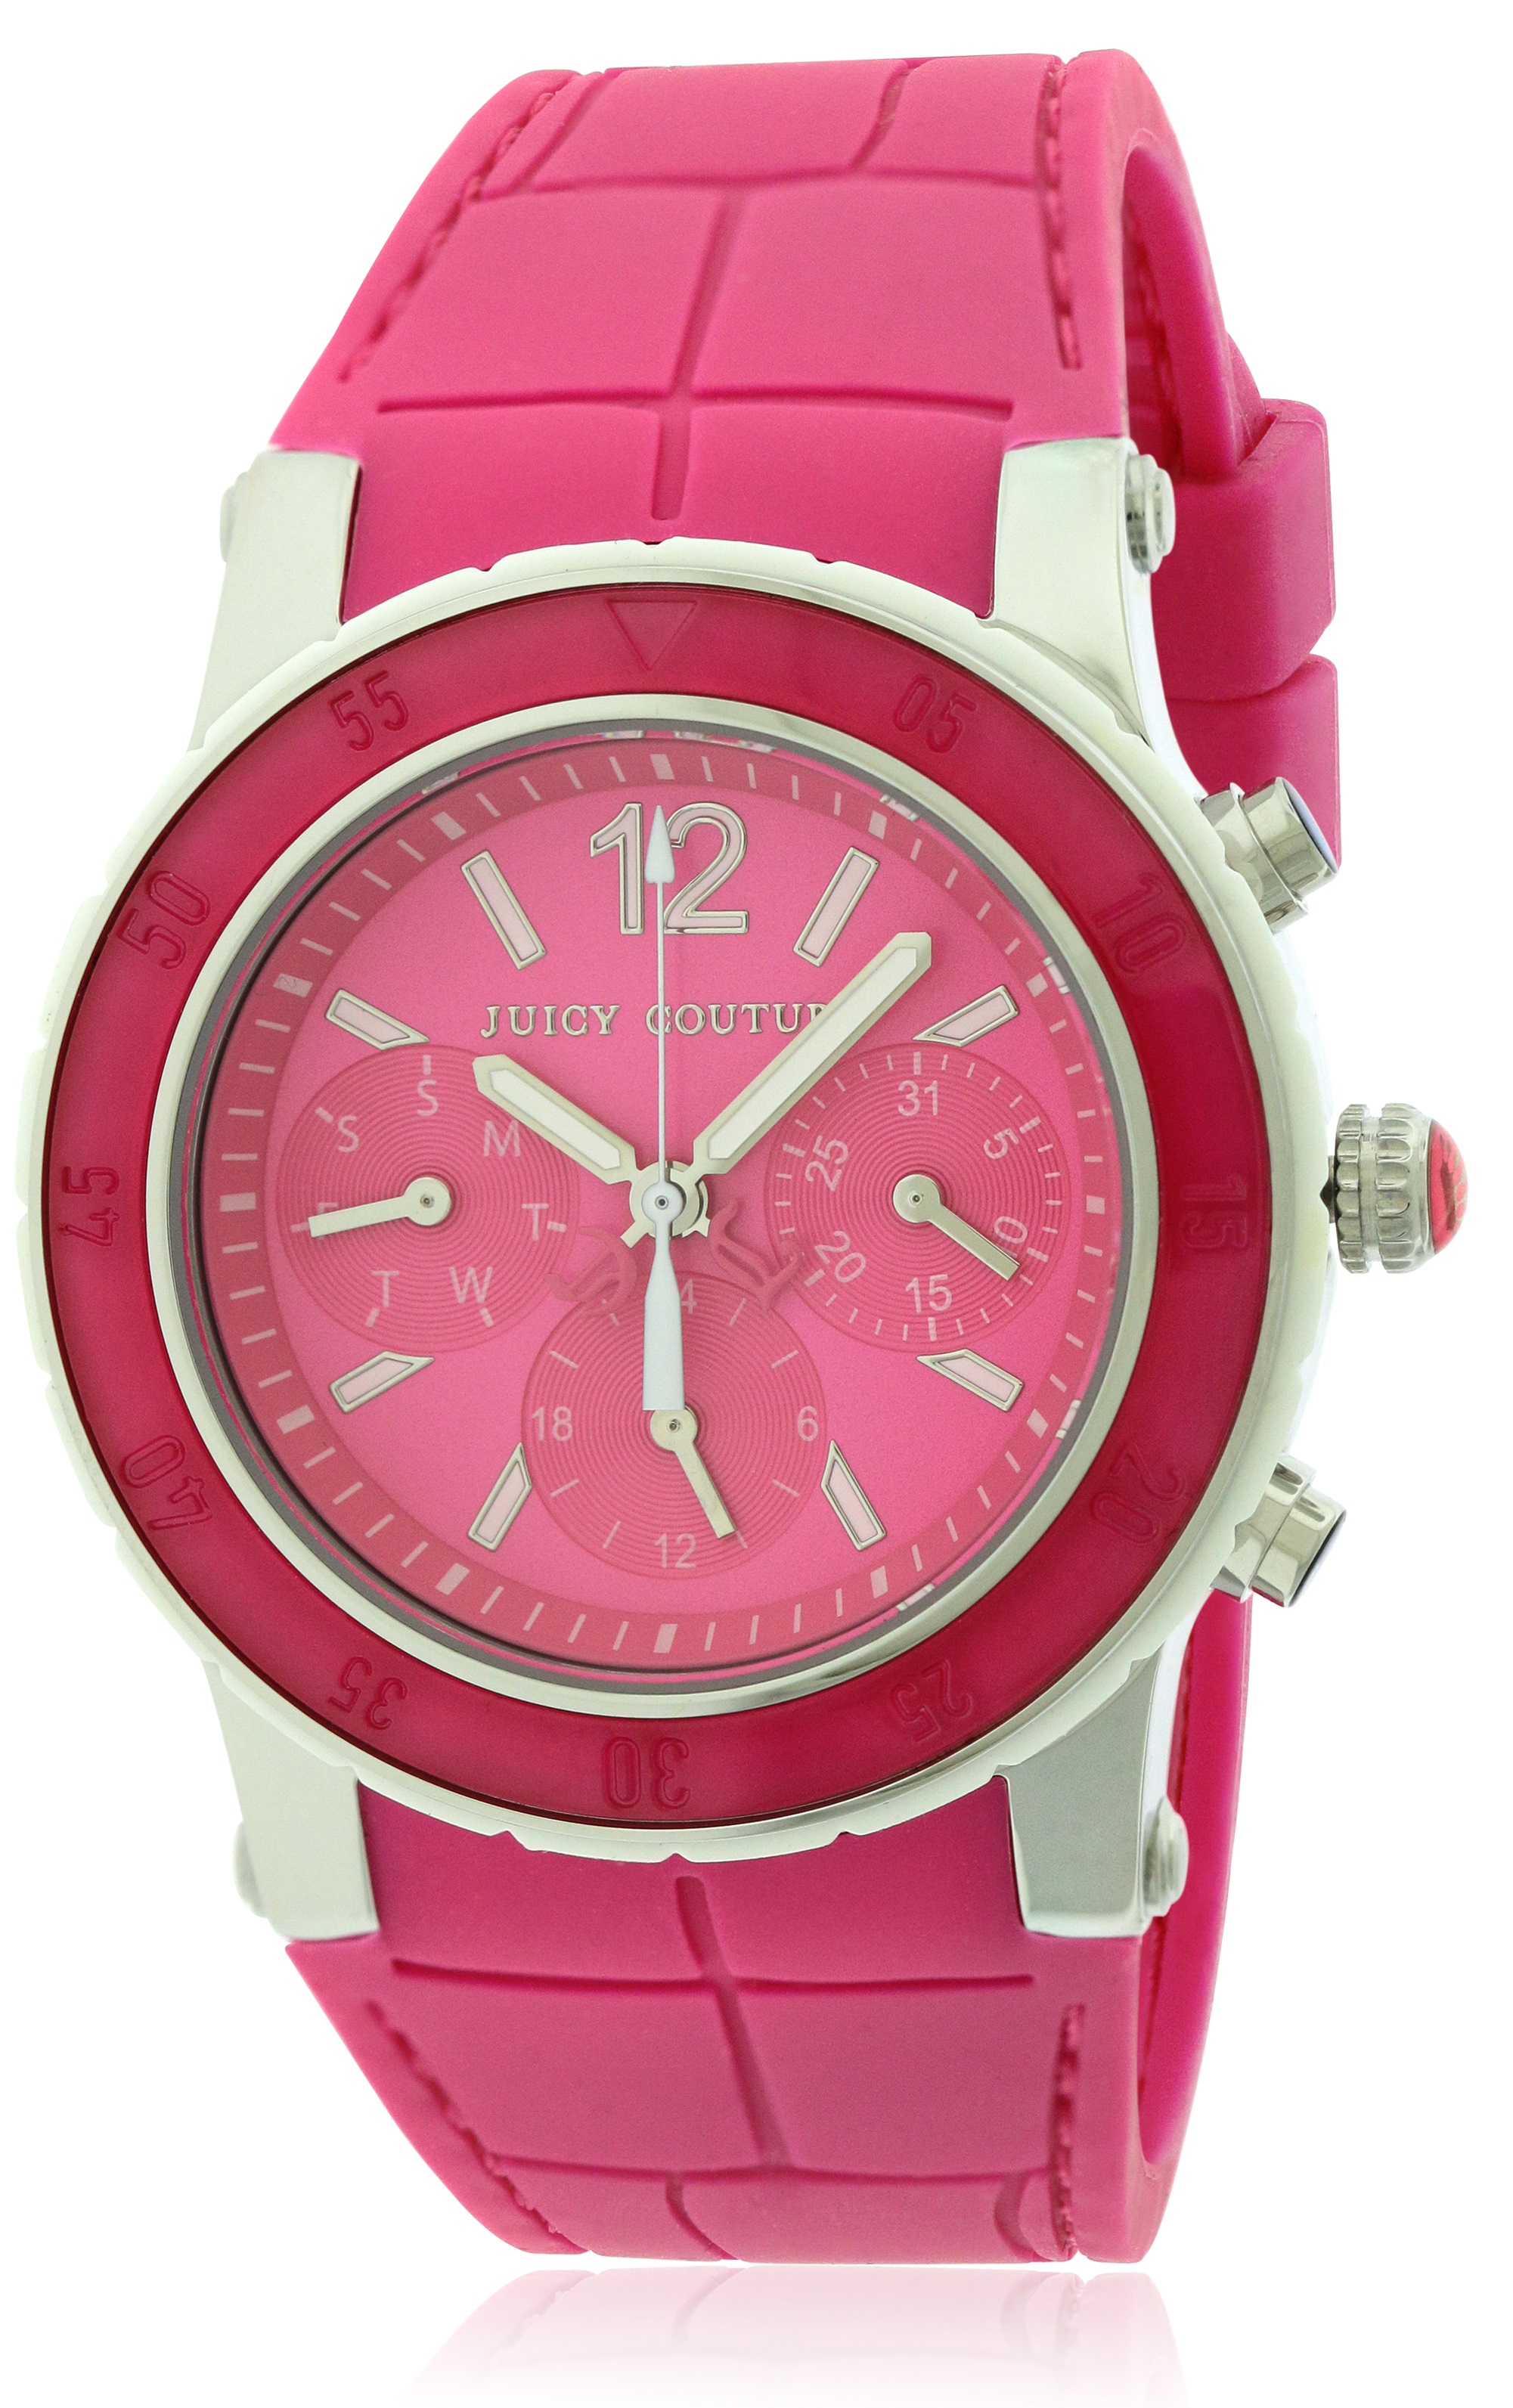 Juicy Couture HRH Pink Dragon Fruit Chronograph Ladies Watch 1900897